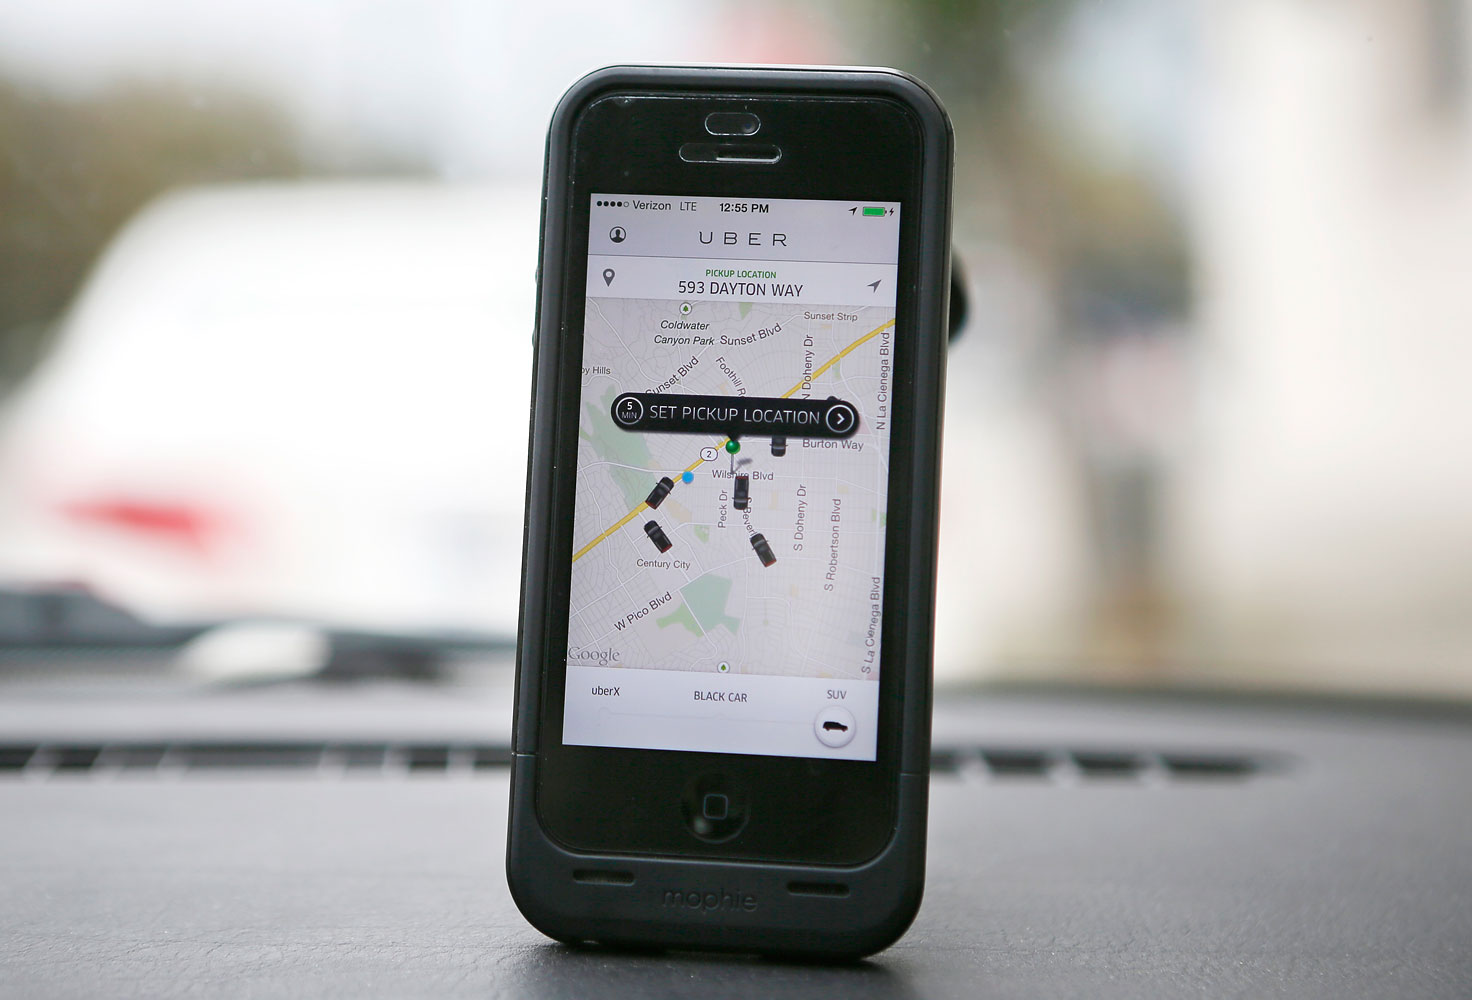 An Uber app is seen on an iPhone in Beverly Hills, Calif., on Dec. 19, 2013.